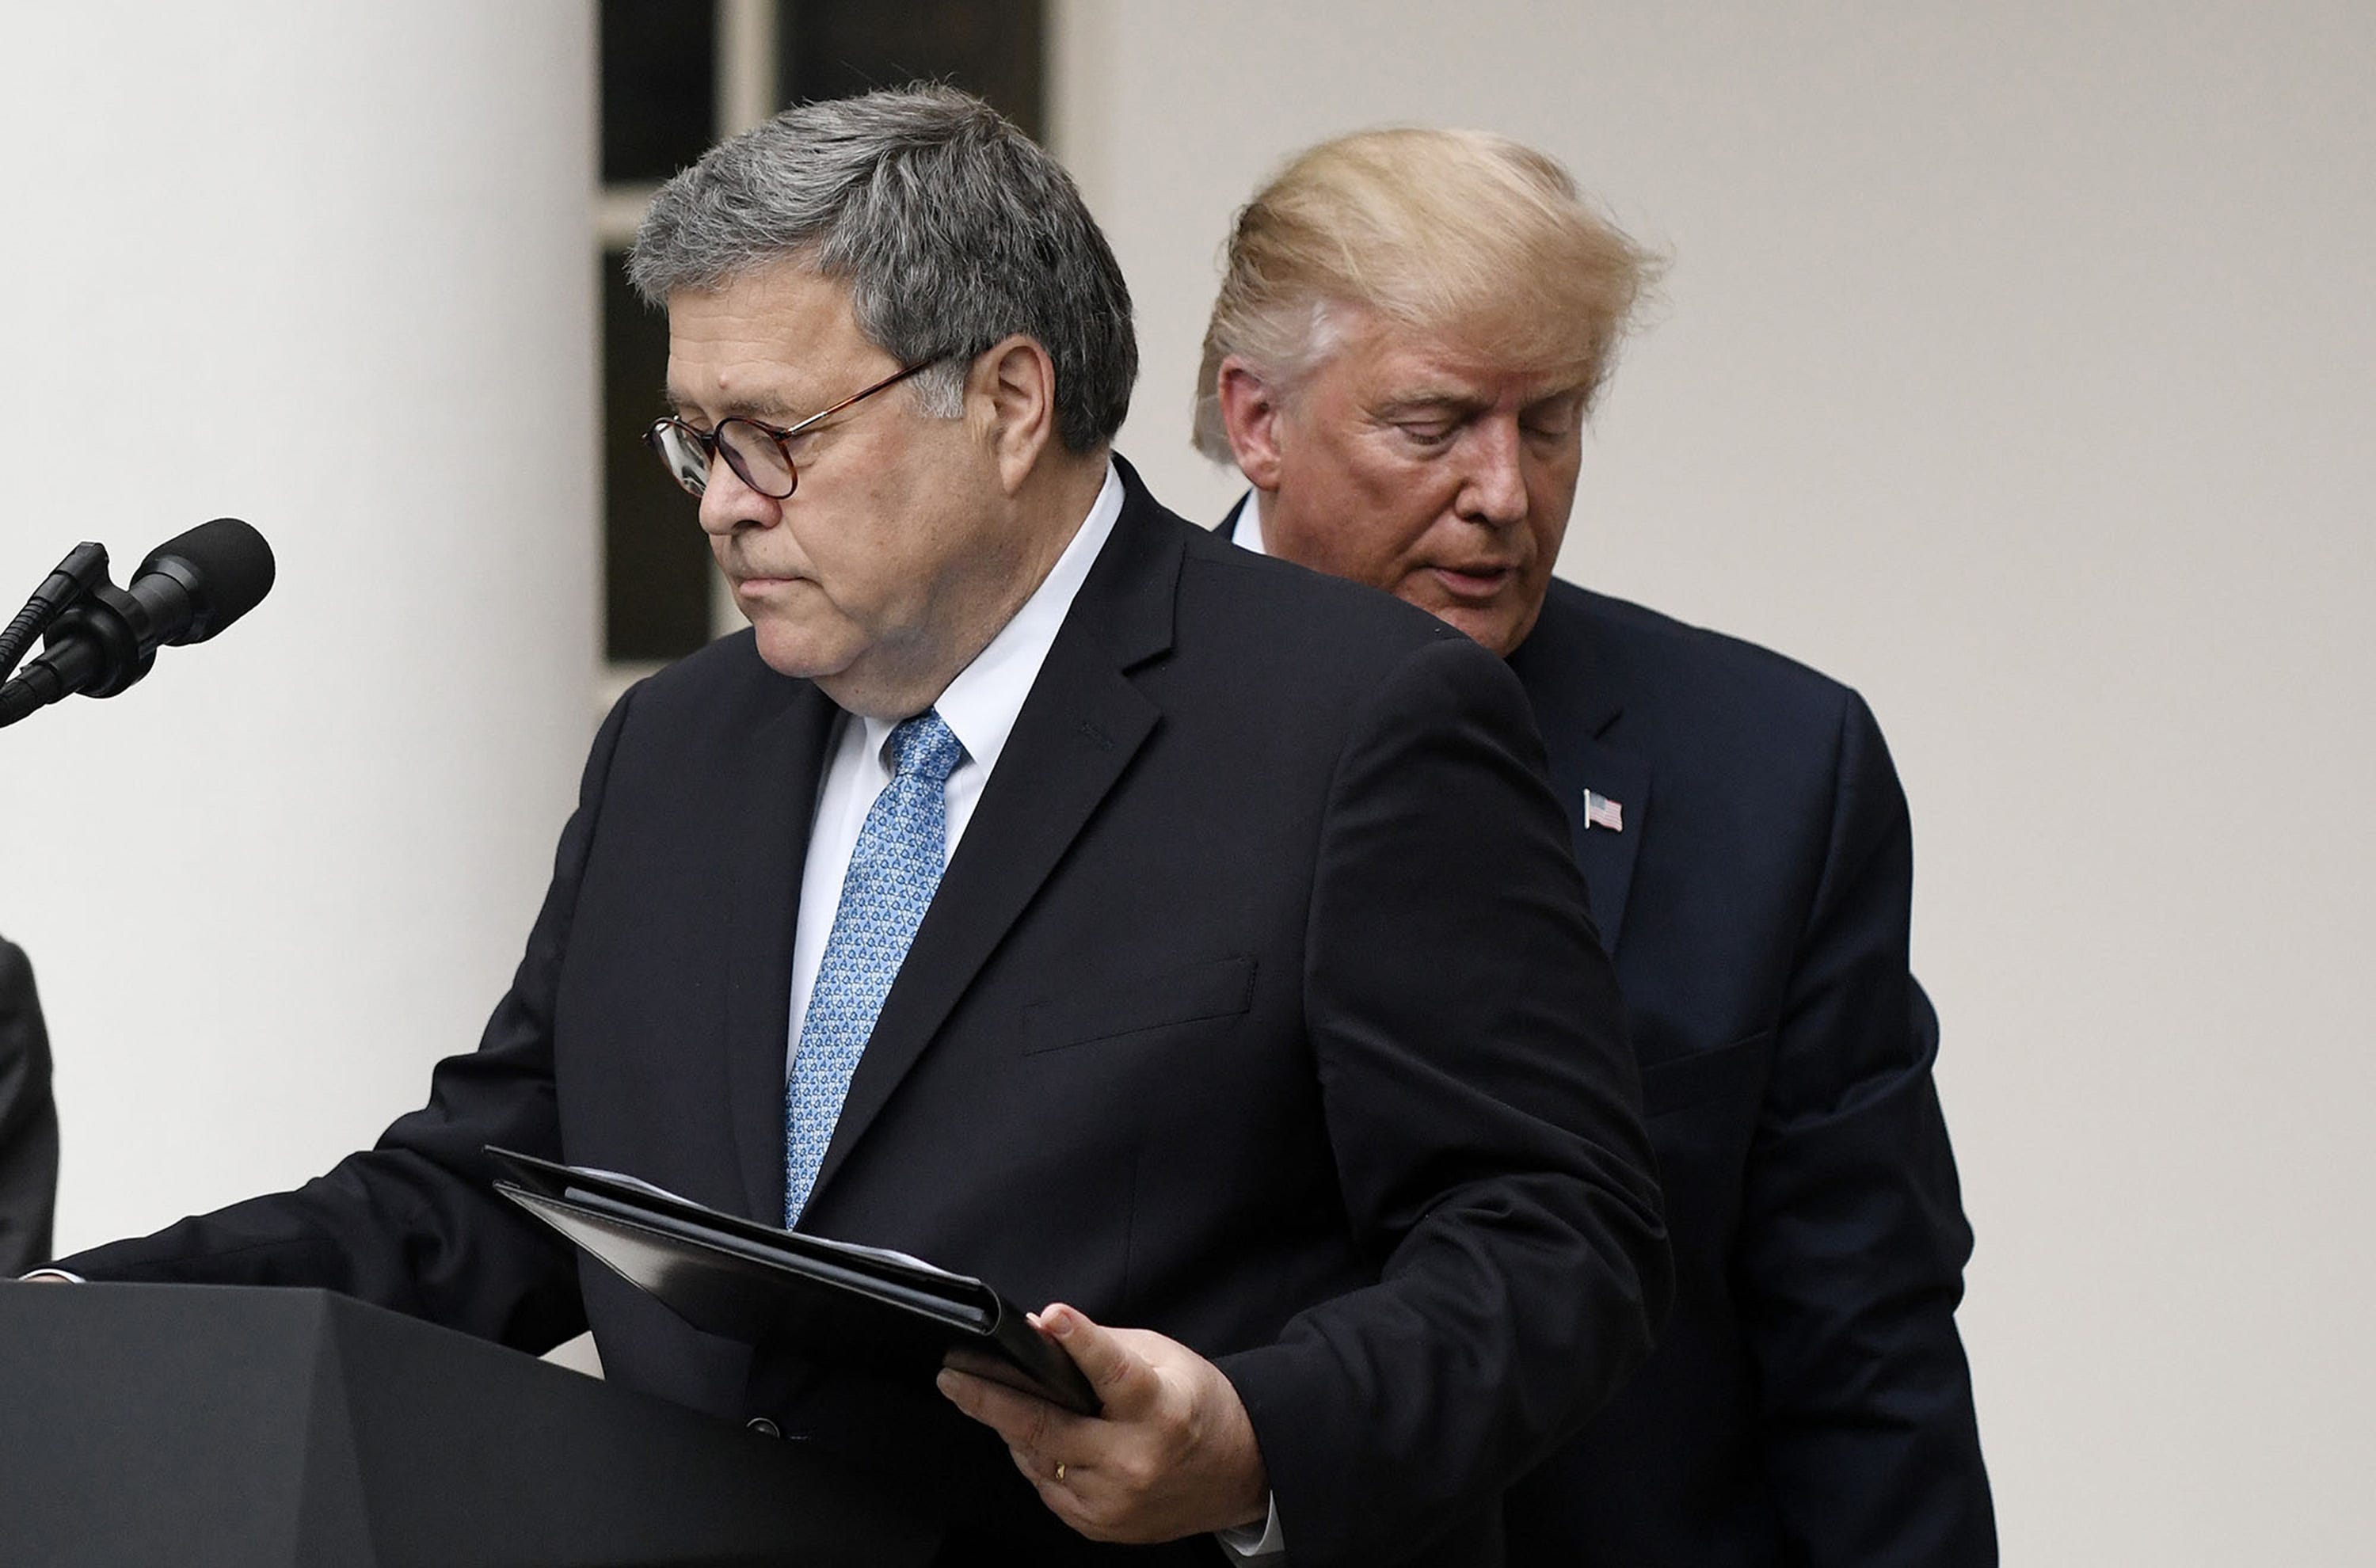 President Donald Trump and U.S. Attorney General William Barr look on during a news conference in the Rose Garden at the White House on July 11, 2019, in Washington, D.C. (Olivier Douliery/Abaca Press/TNS)